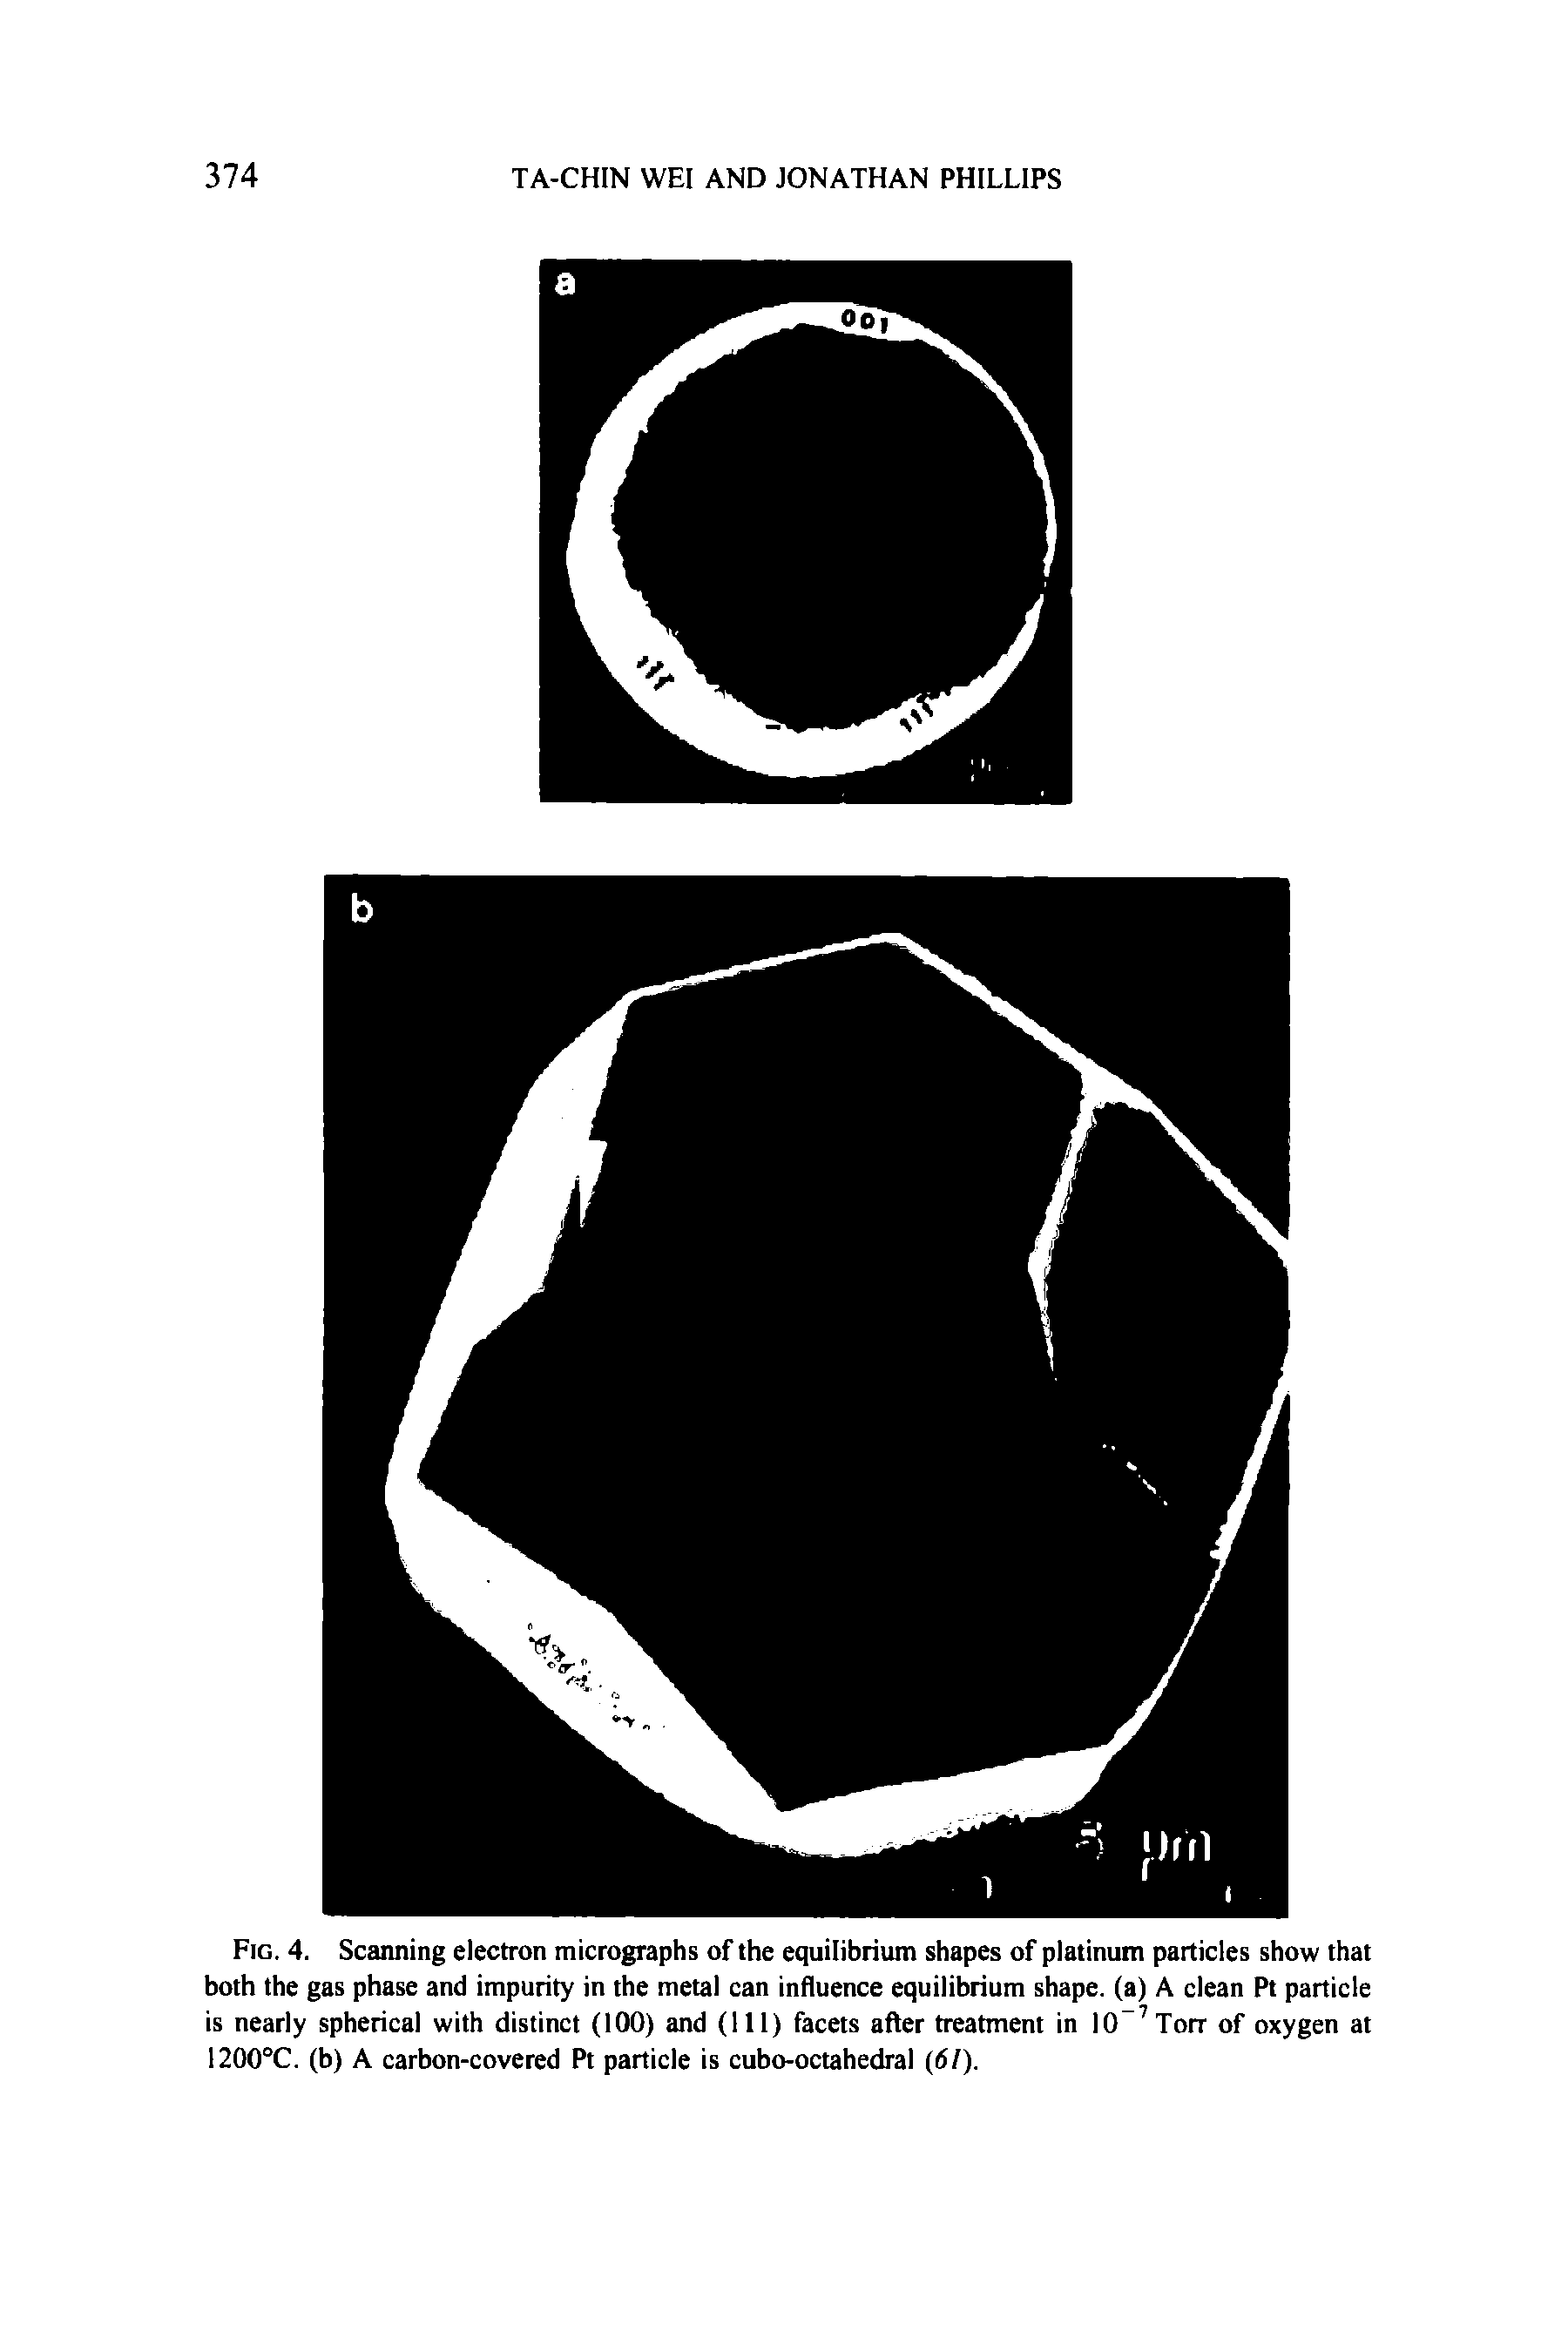 Fig. 4. Scanning electron micrographs of the equilibrium shapes of platinum particles show that both the gas phase and impurity in the metal can influence equilibrium shape, (a) A clean Pt particle is nearly spherical with distinct (100) and (111) facets after treatment in IO 7Torr of oxygen at 1200°C. (b) A carbon-covered Pt particle is cubo-octahedral (61).